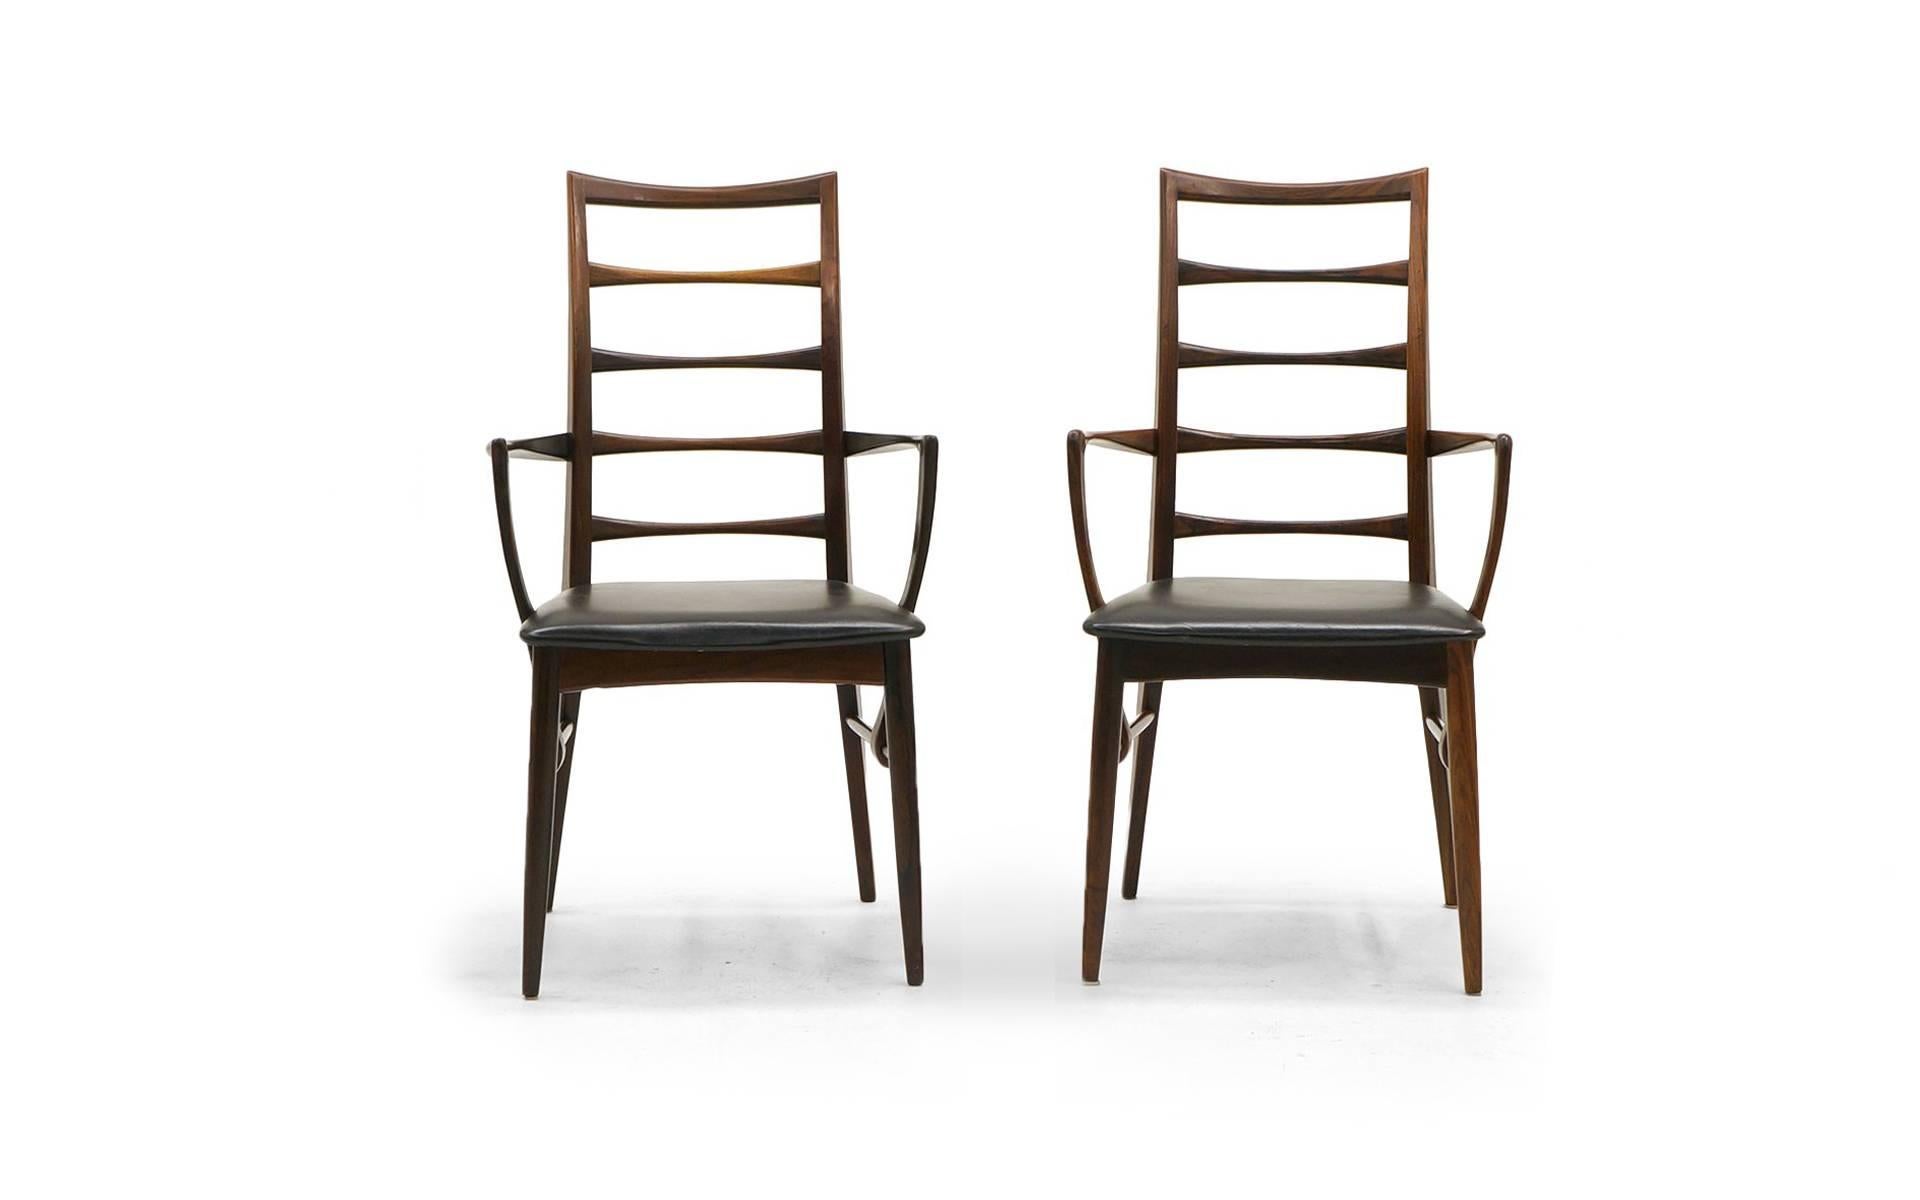 Danish 6 Rosewood Lis Dining Chairs by Niels Kofoed, Two with arms, Four armless